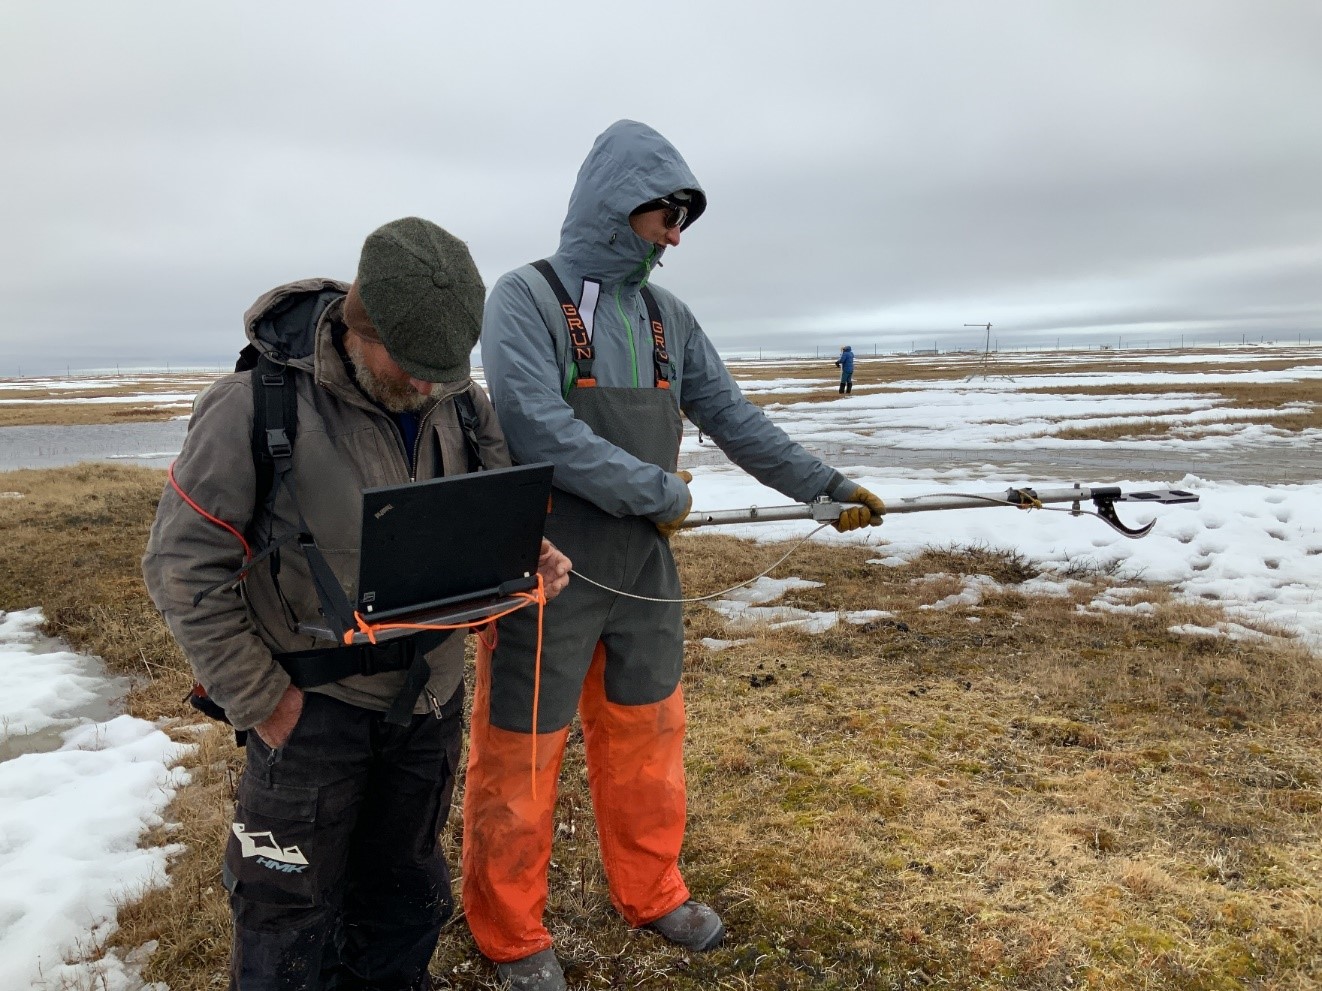 Sturm, left, studies a computer readout during SALVO work in the spring of 2019. Dark patches of tundra emerge to soak up more heat, decreasing the albedo of the landscape.